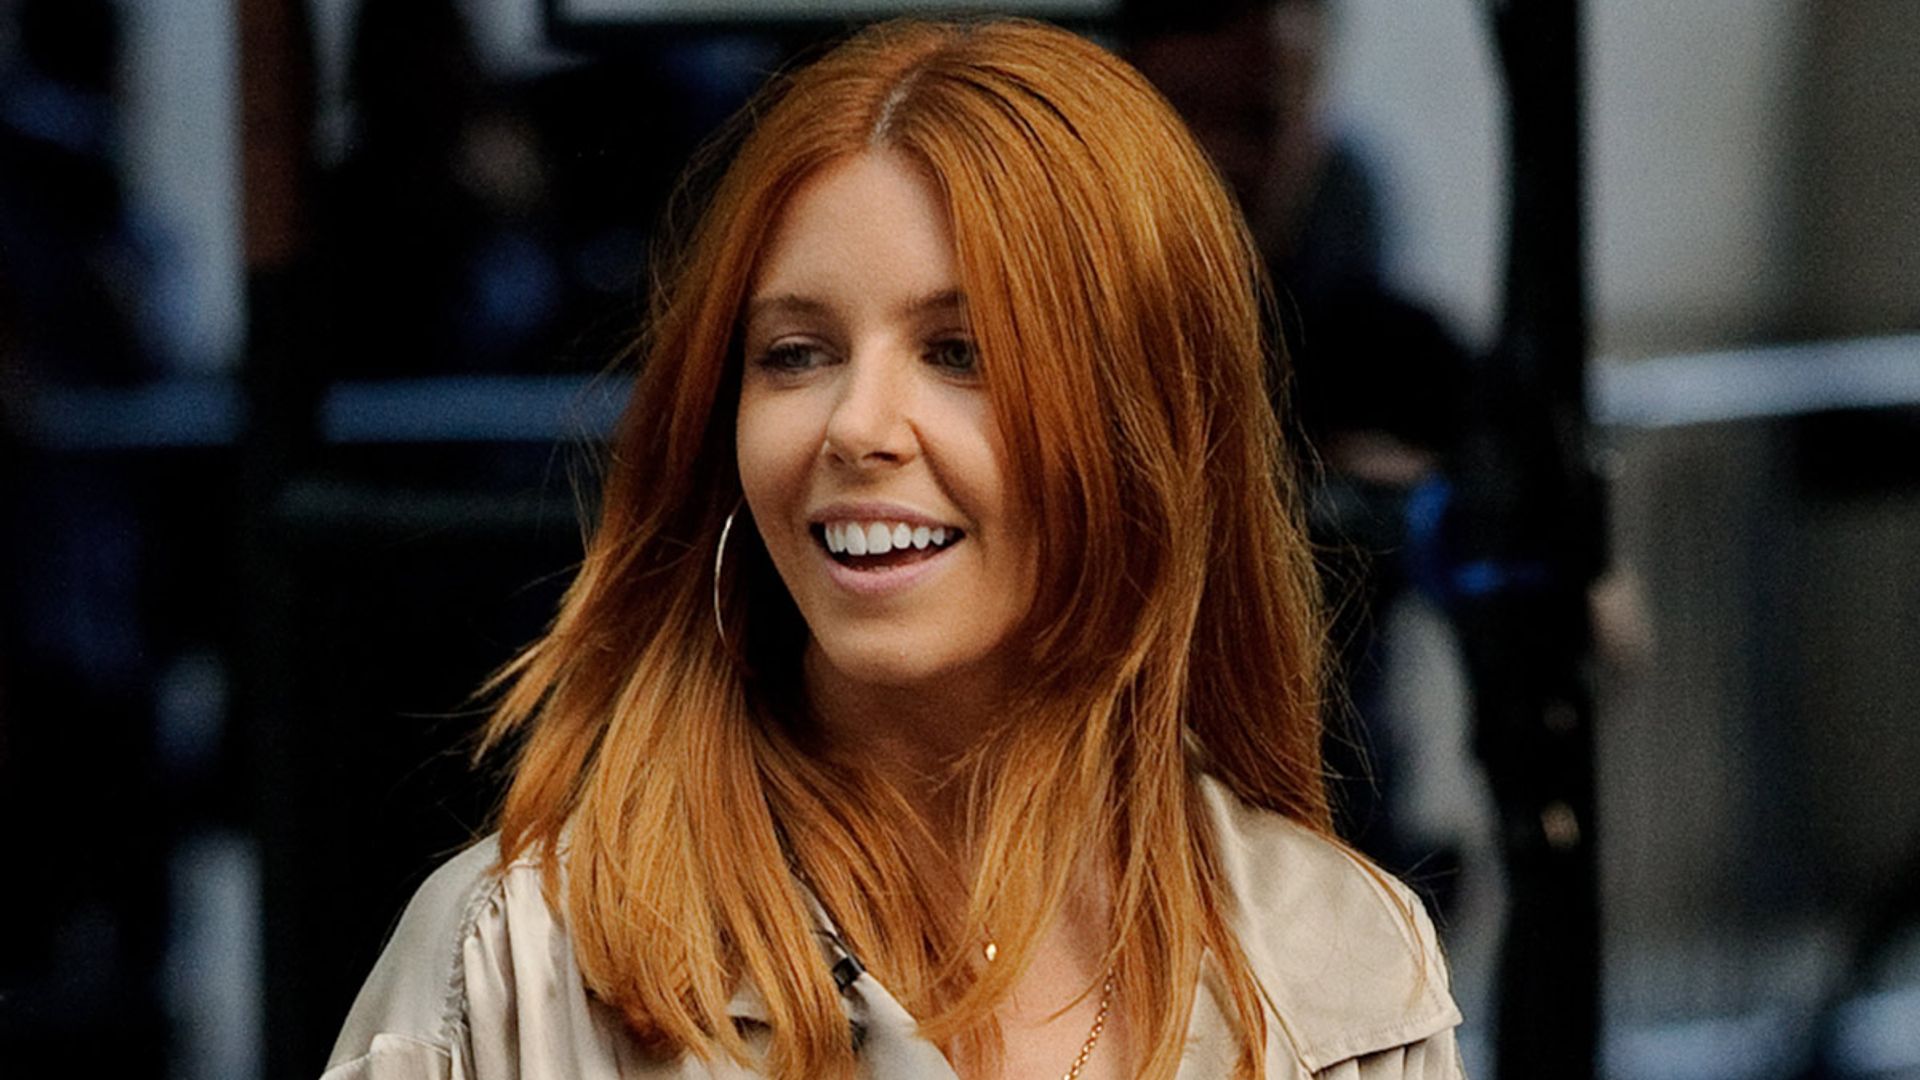 Stacey Dooley's sparkling new diamond ring has us truly swooning